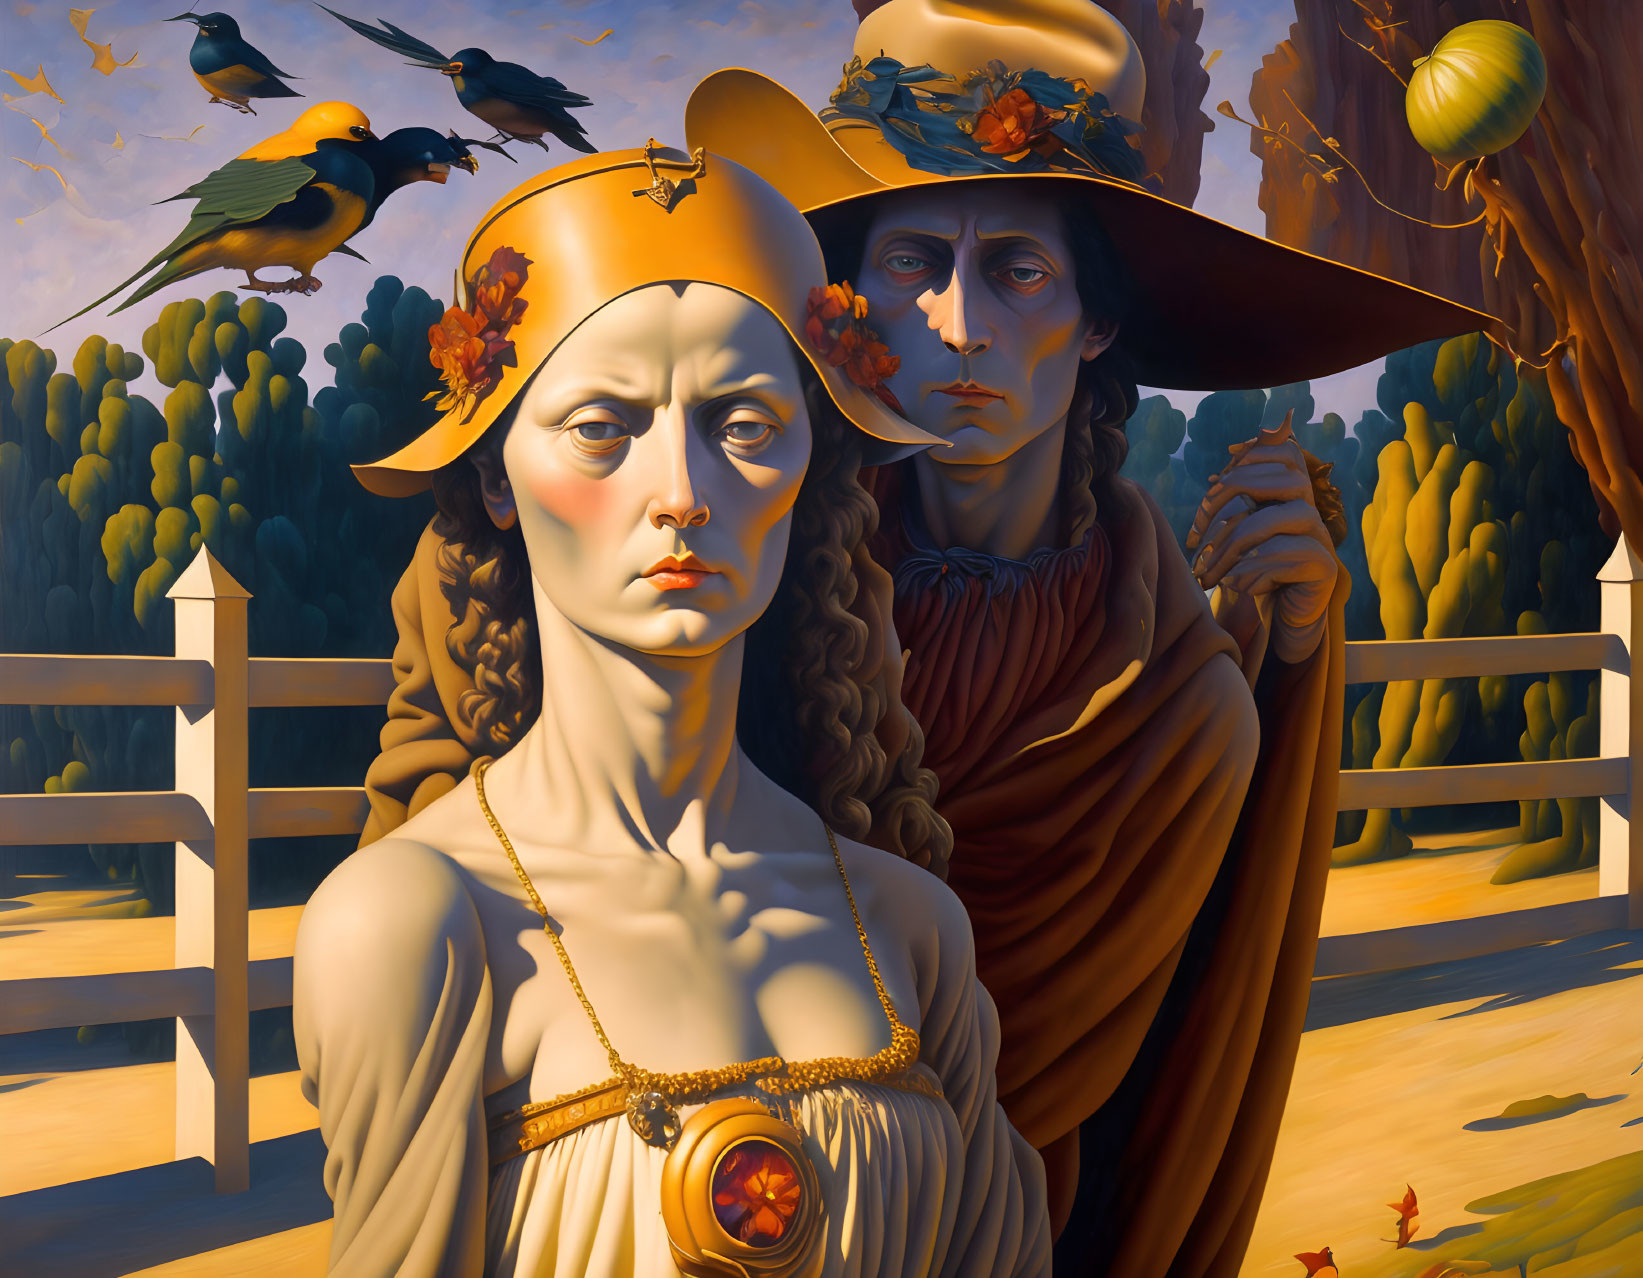 Surreal painting featuring two individuals in classical attire with birds and pastoral background